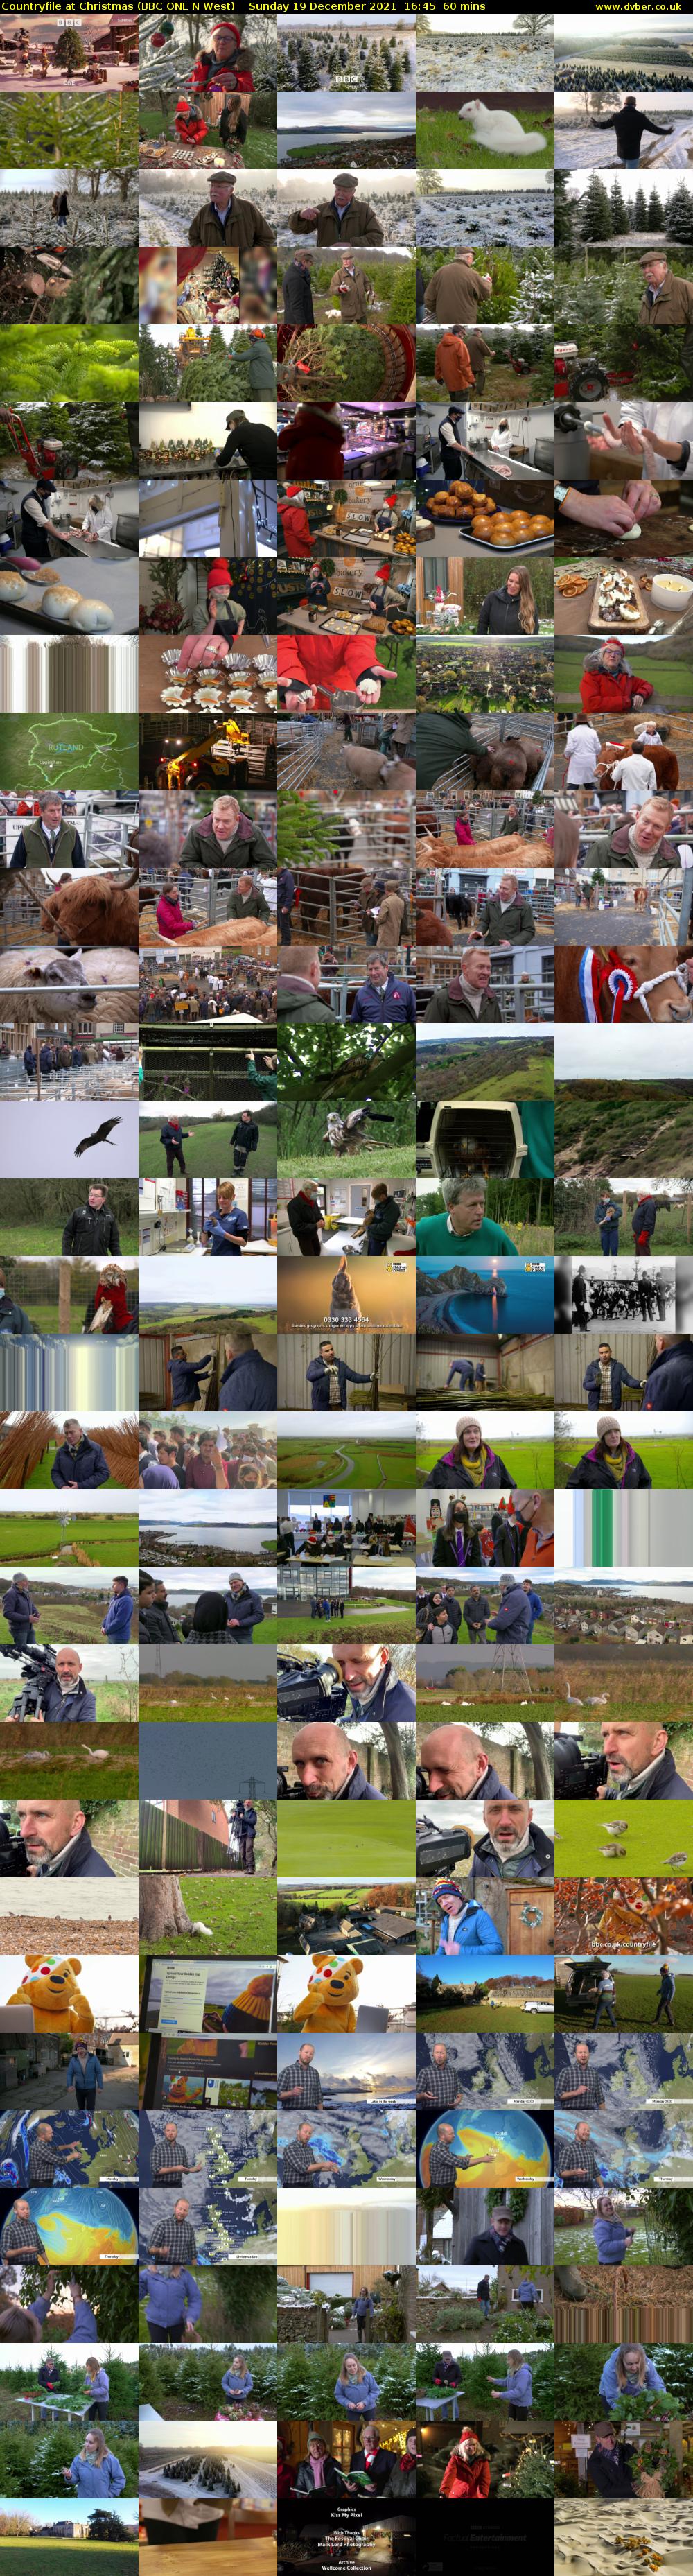 Countryfile at Christmas (BBC ONE N West) Sunday 19 December 2021 16:45 - 17:45